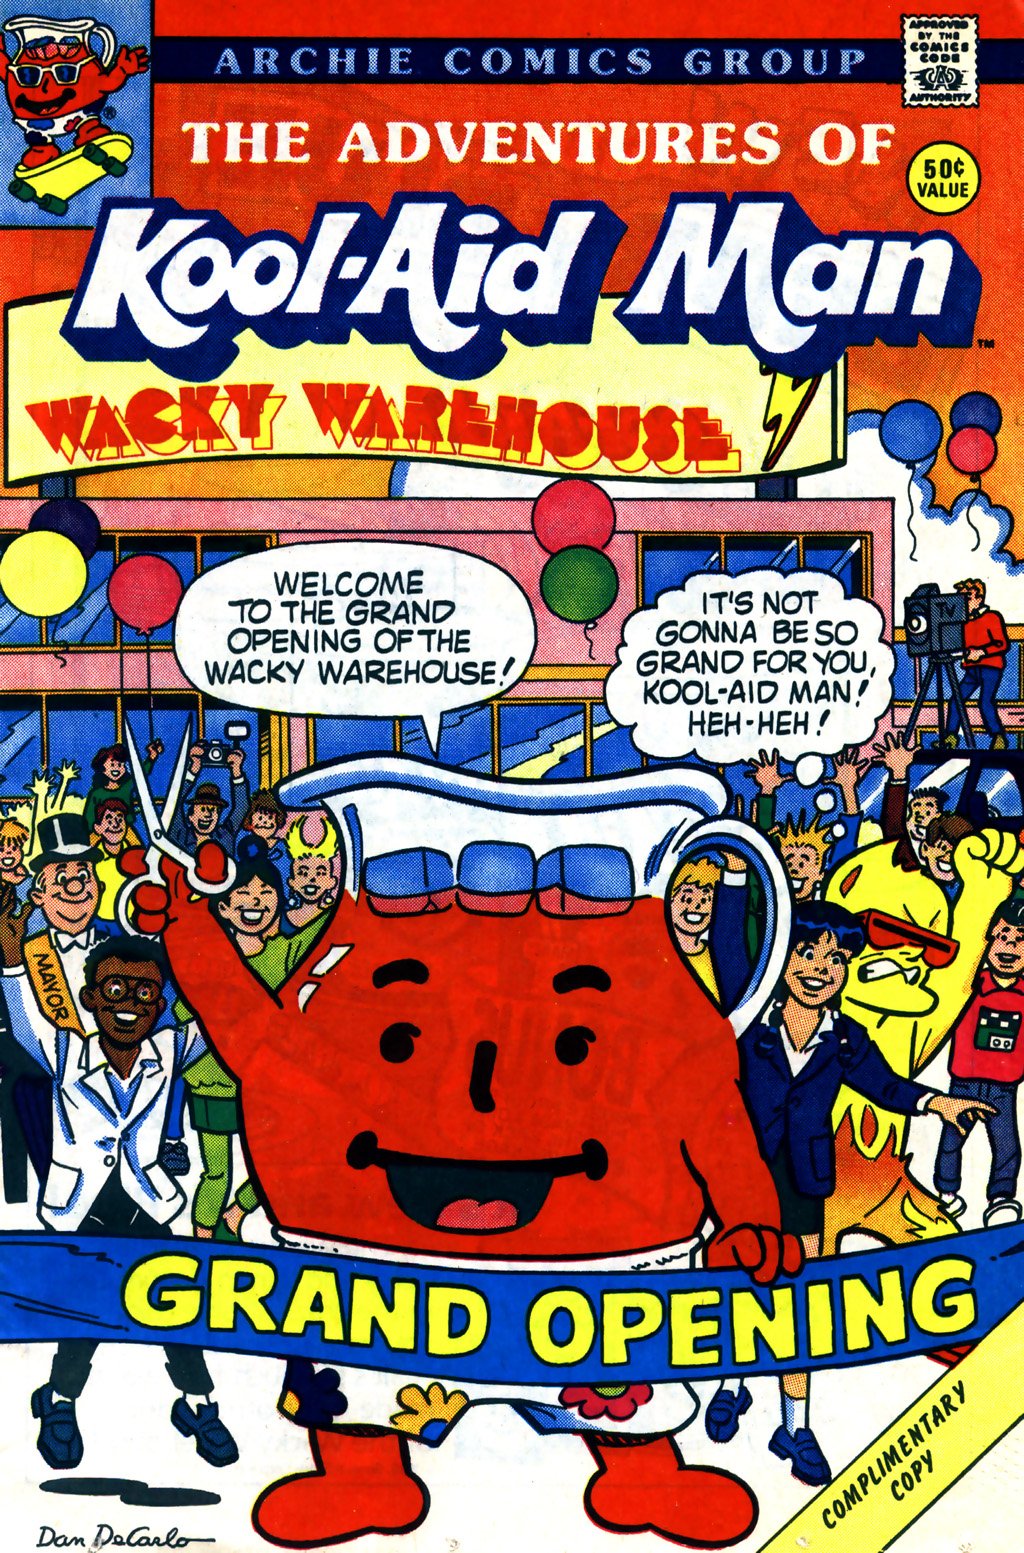 The Adventures of Kool-Aid Man.mp4. here. 